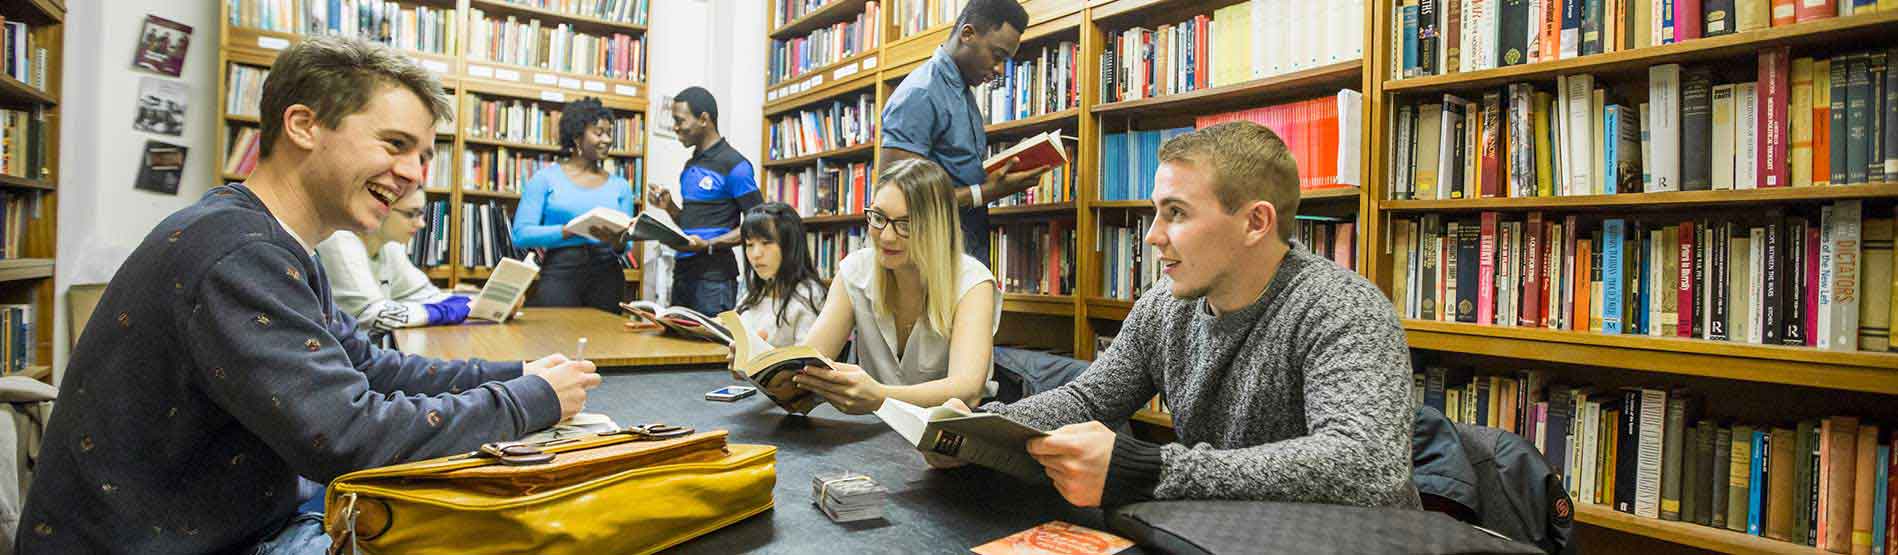 Students enjoying their studies in the library